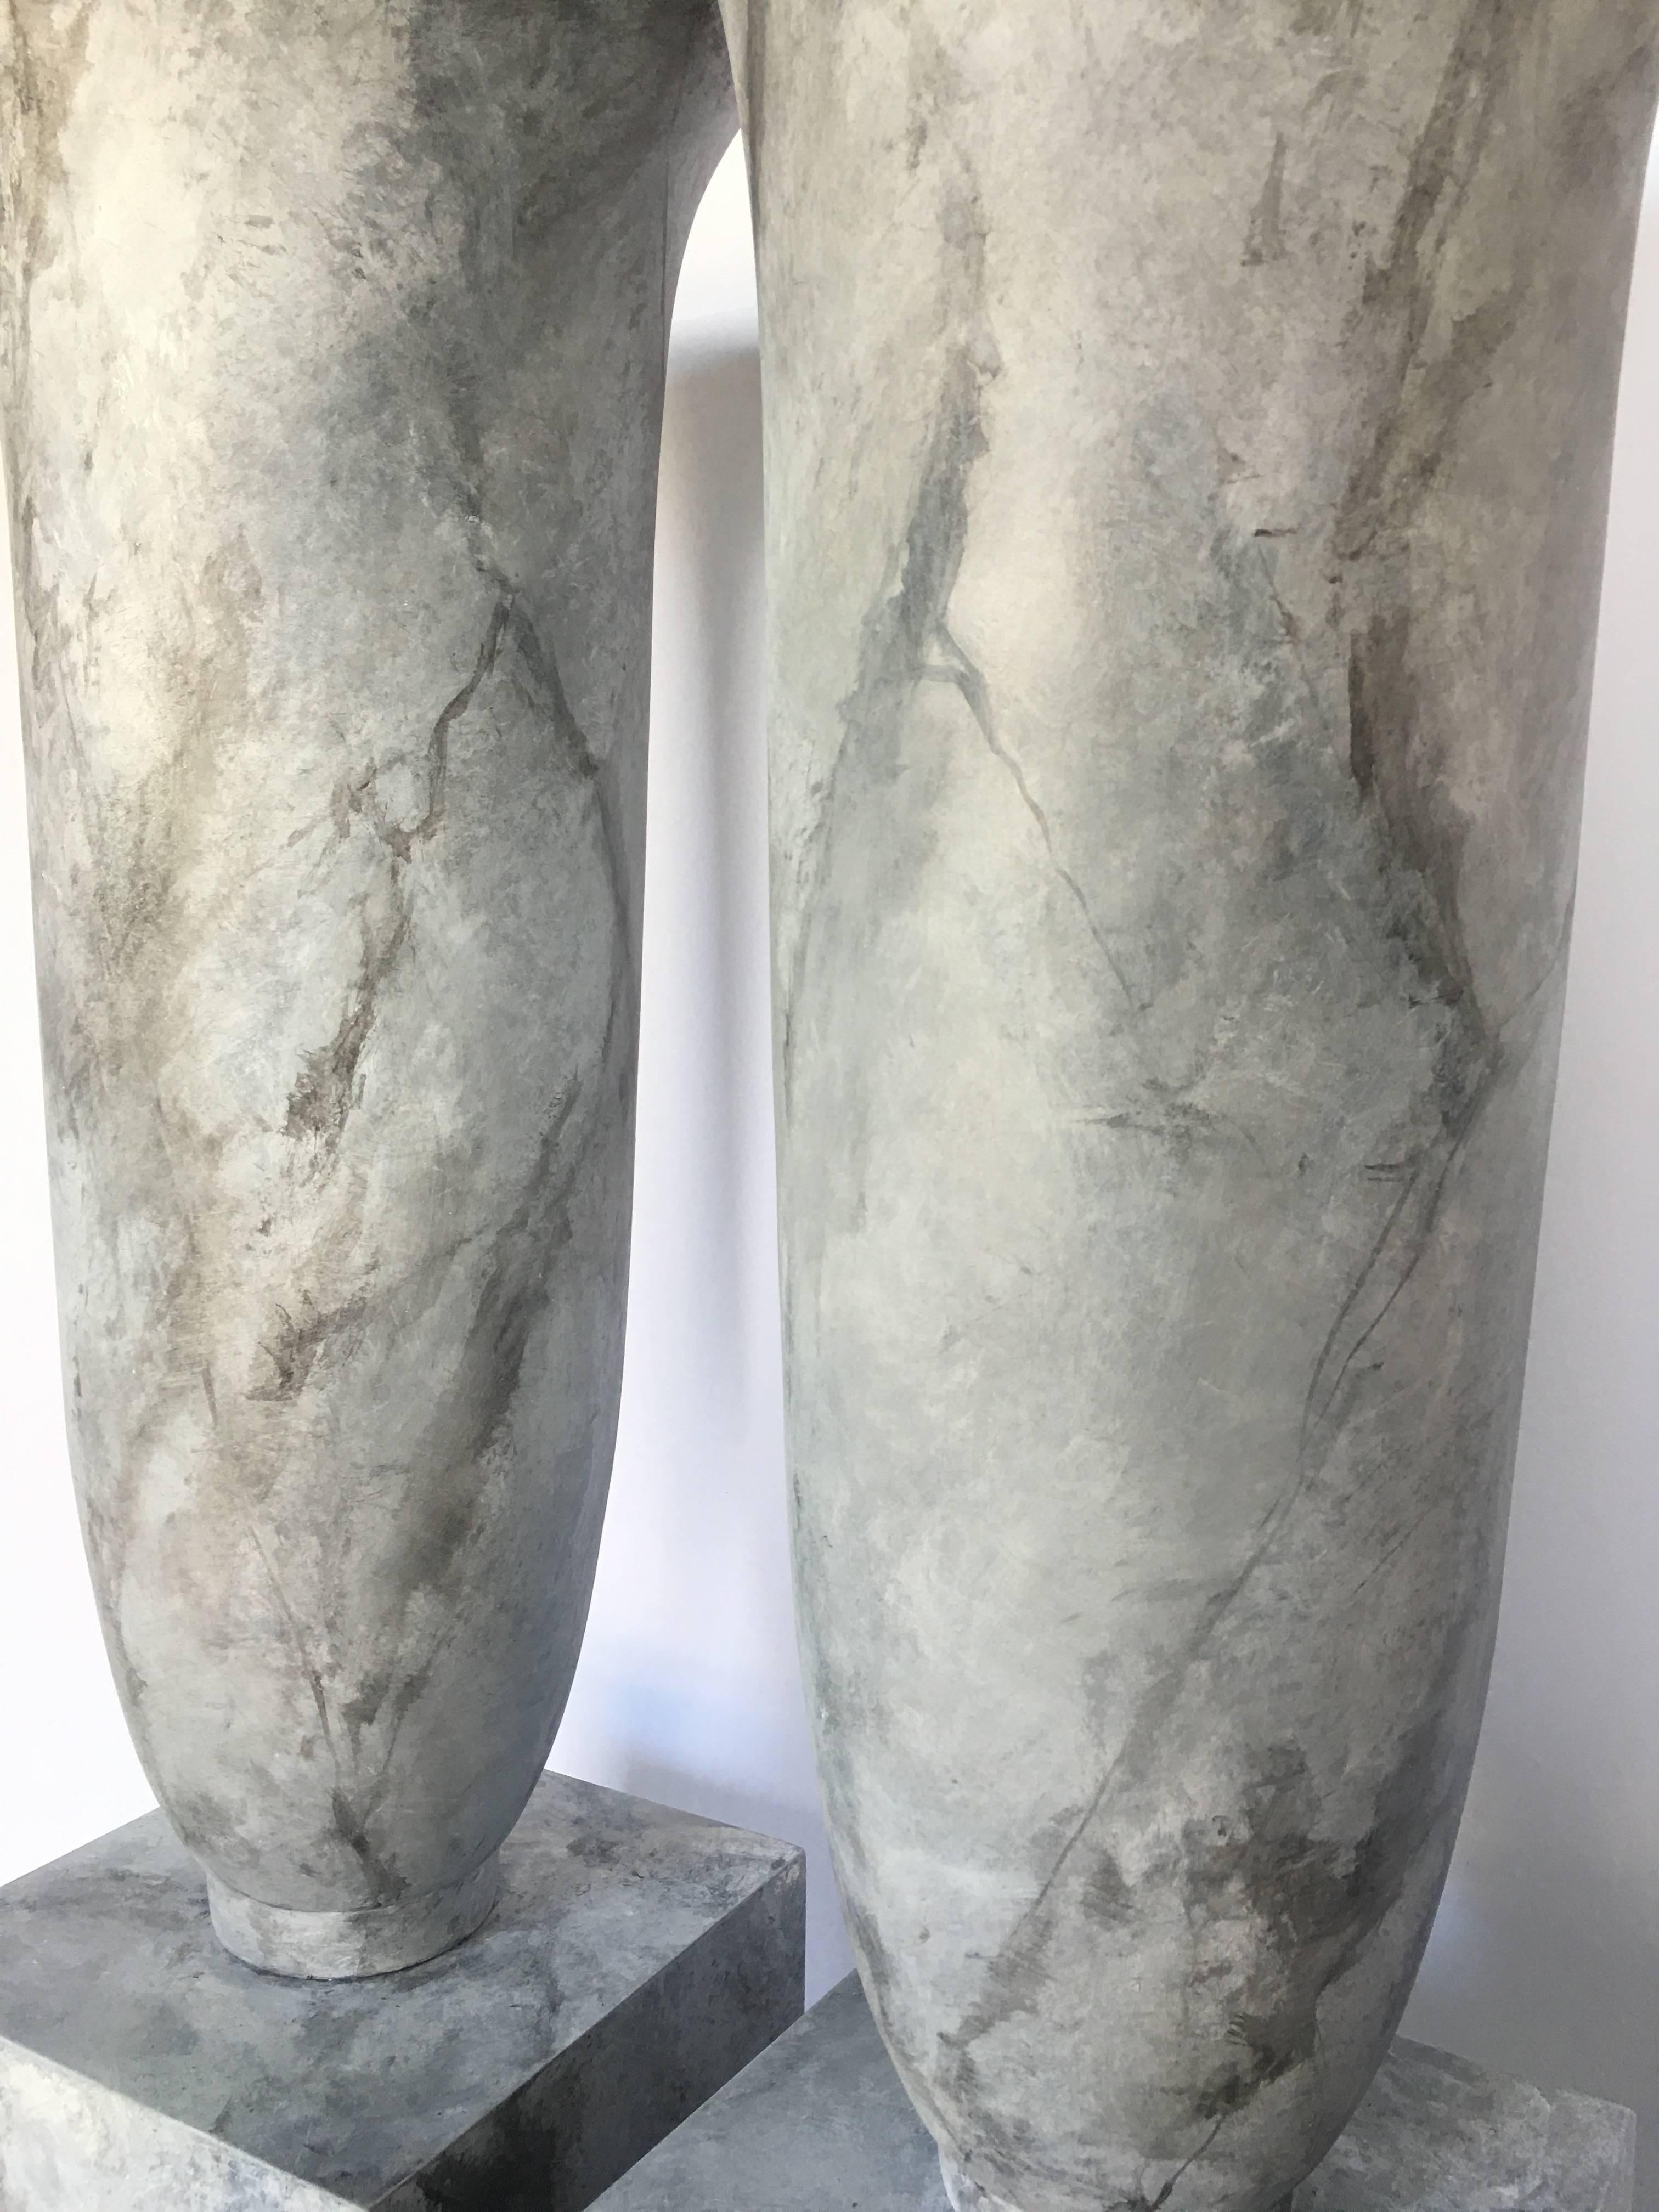 Grand Faux Marble Urn Vessels, Pair In Excellent Condition For Sale In Lambertville, NJ